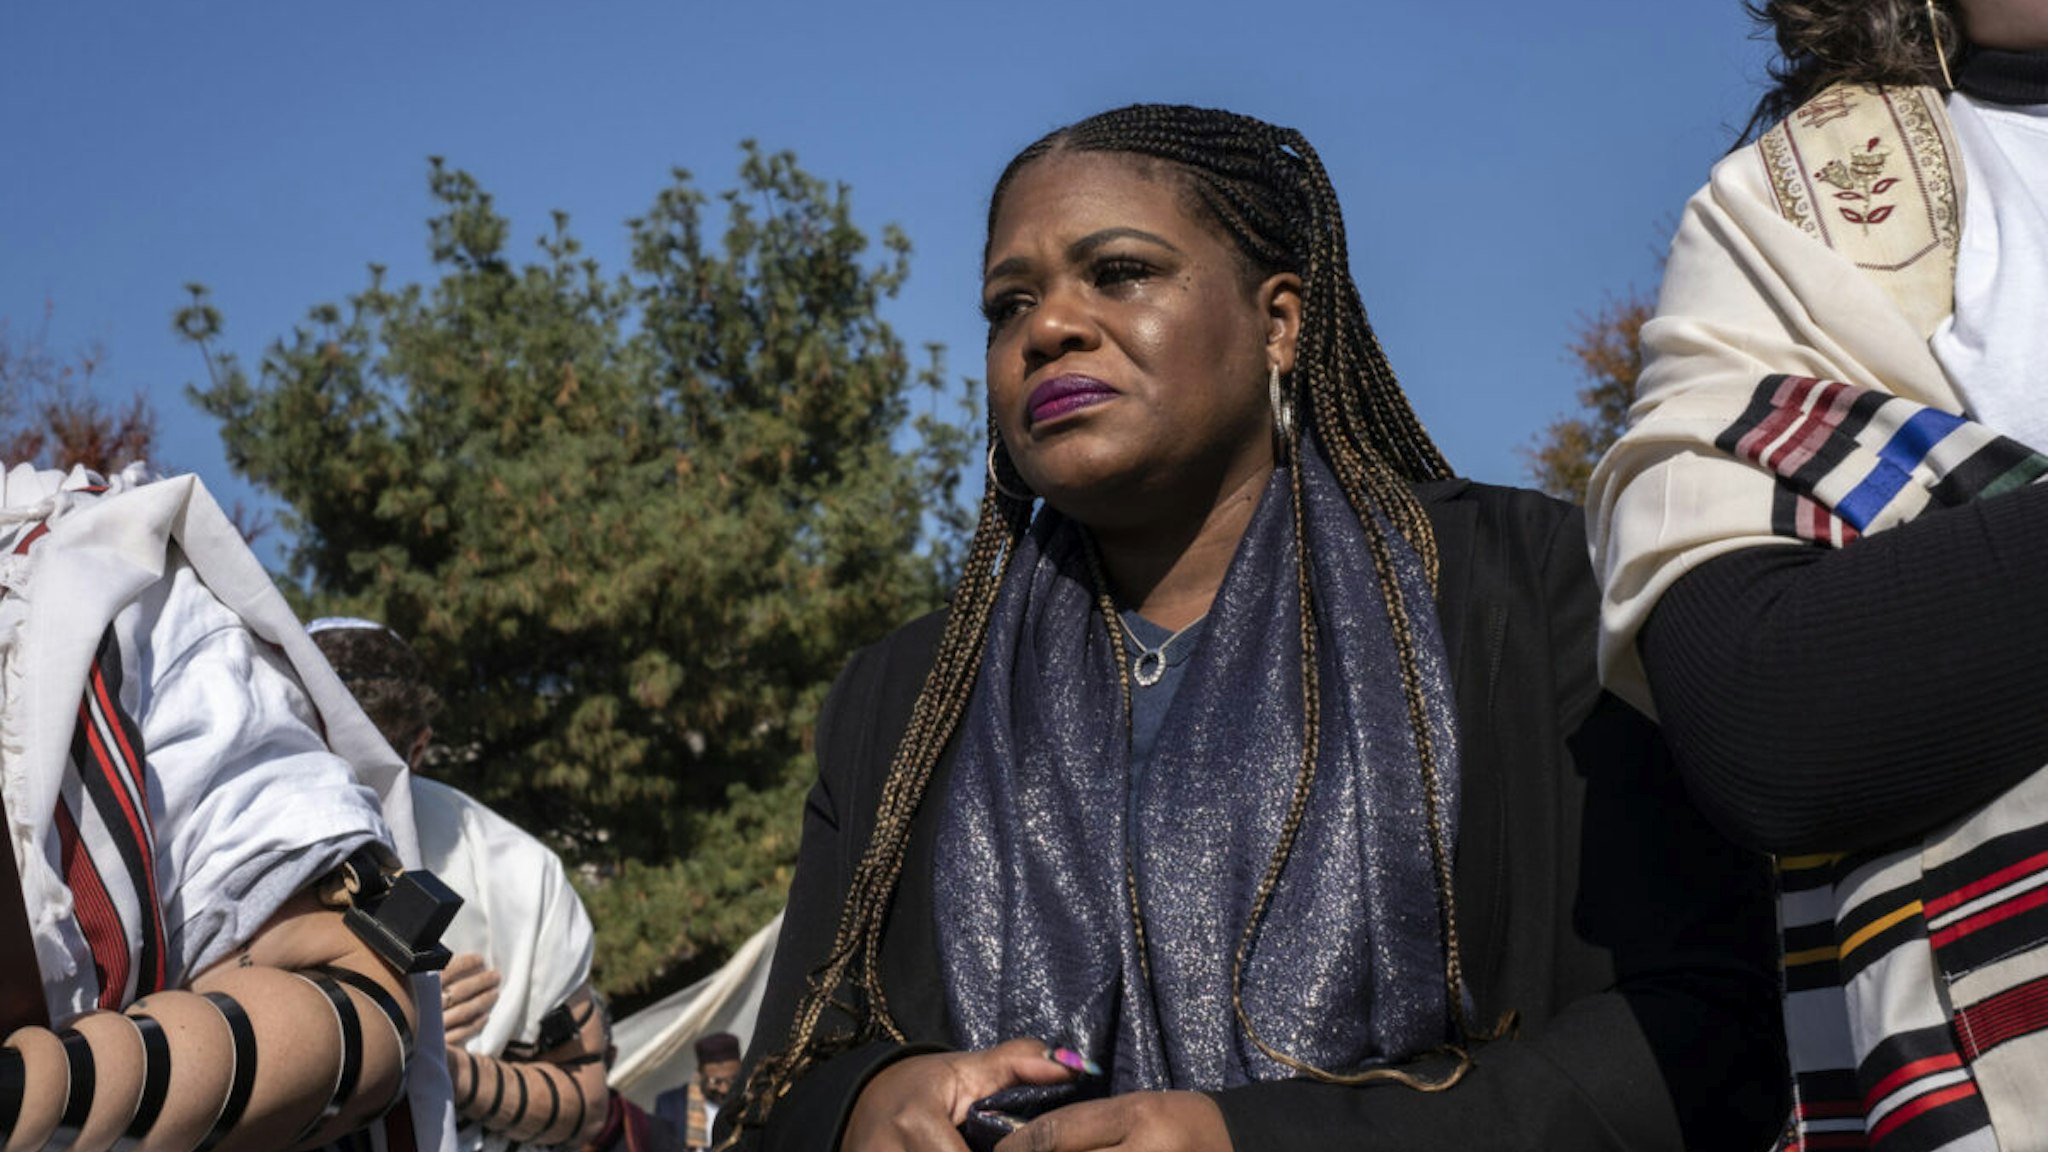 U.S. Rep. Cori Bush takes part in a Jewish Shacharit morning prayer service near the U.S. Capitol on Capitol Hill . Rabbis for Ceasefire held a prayer service to pray for a ceasefire in Gaza.